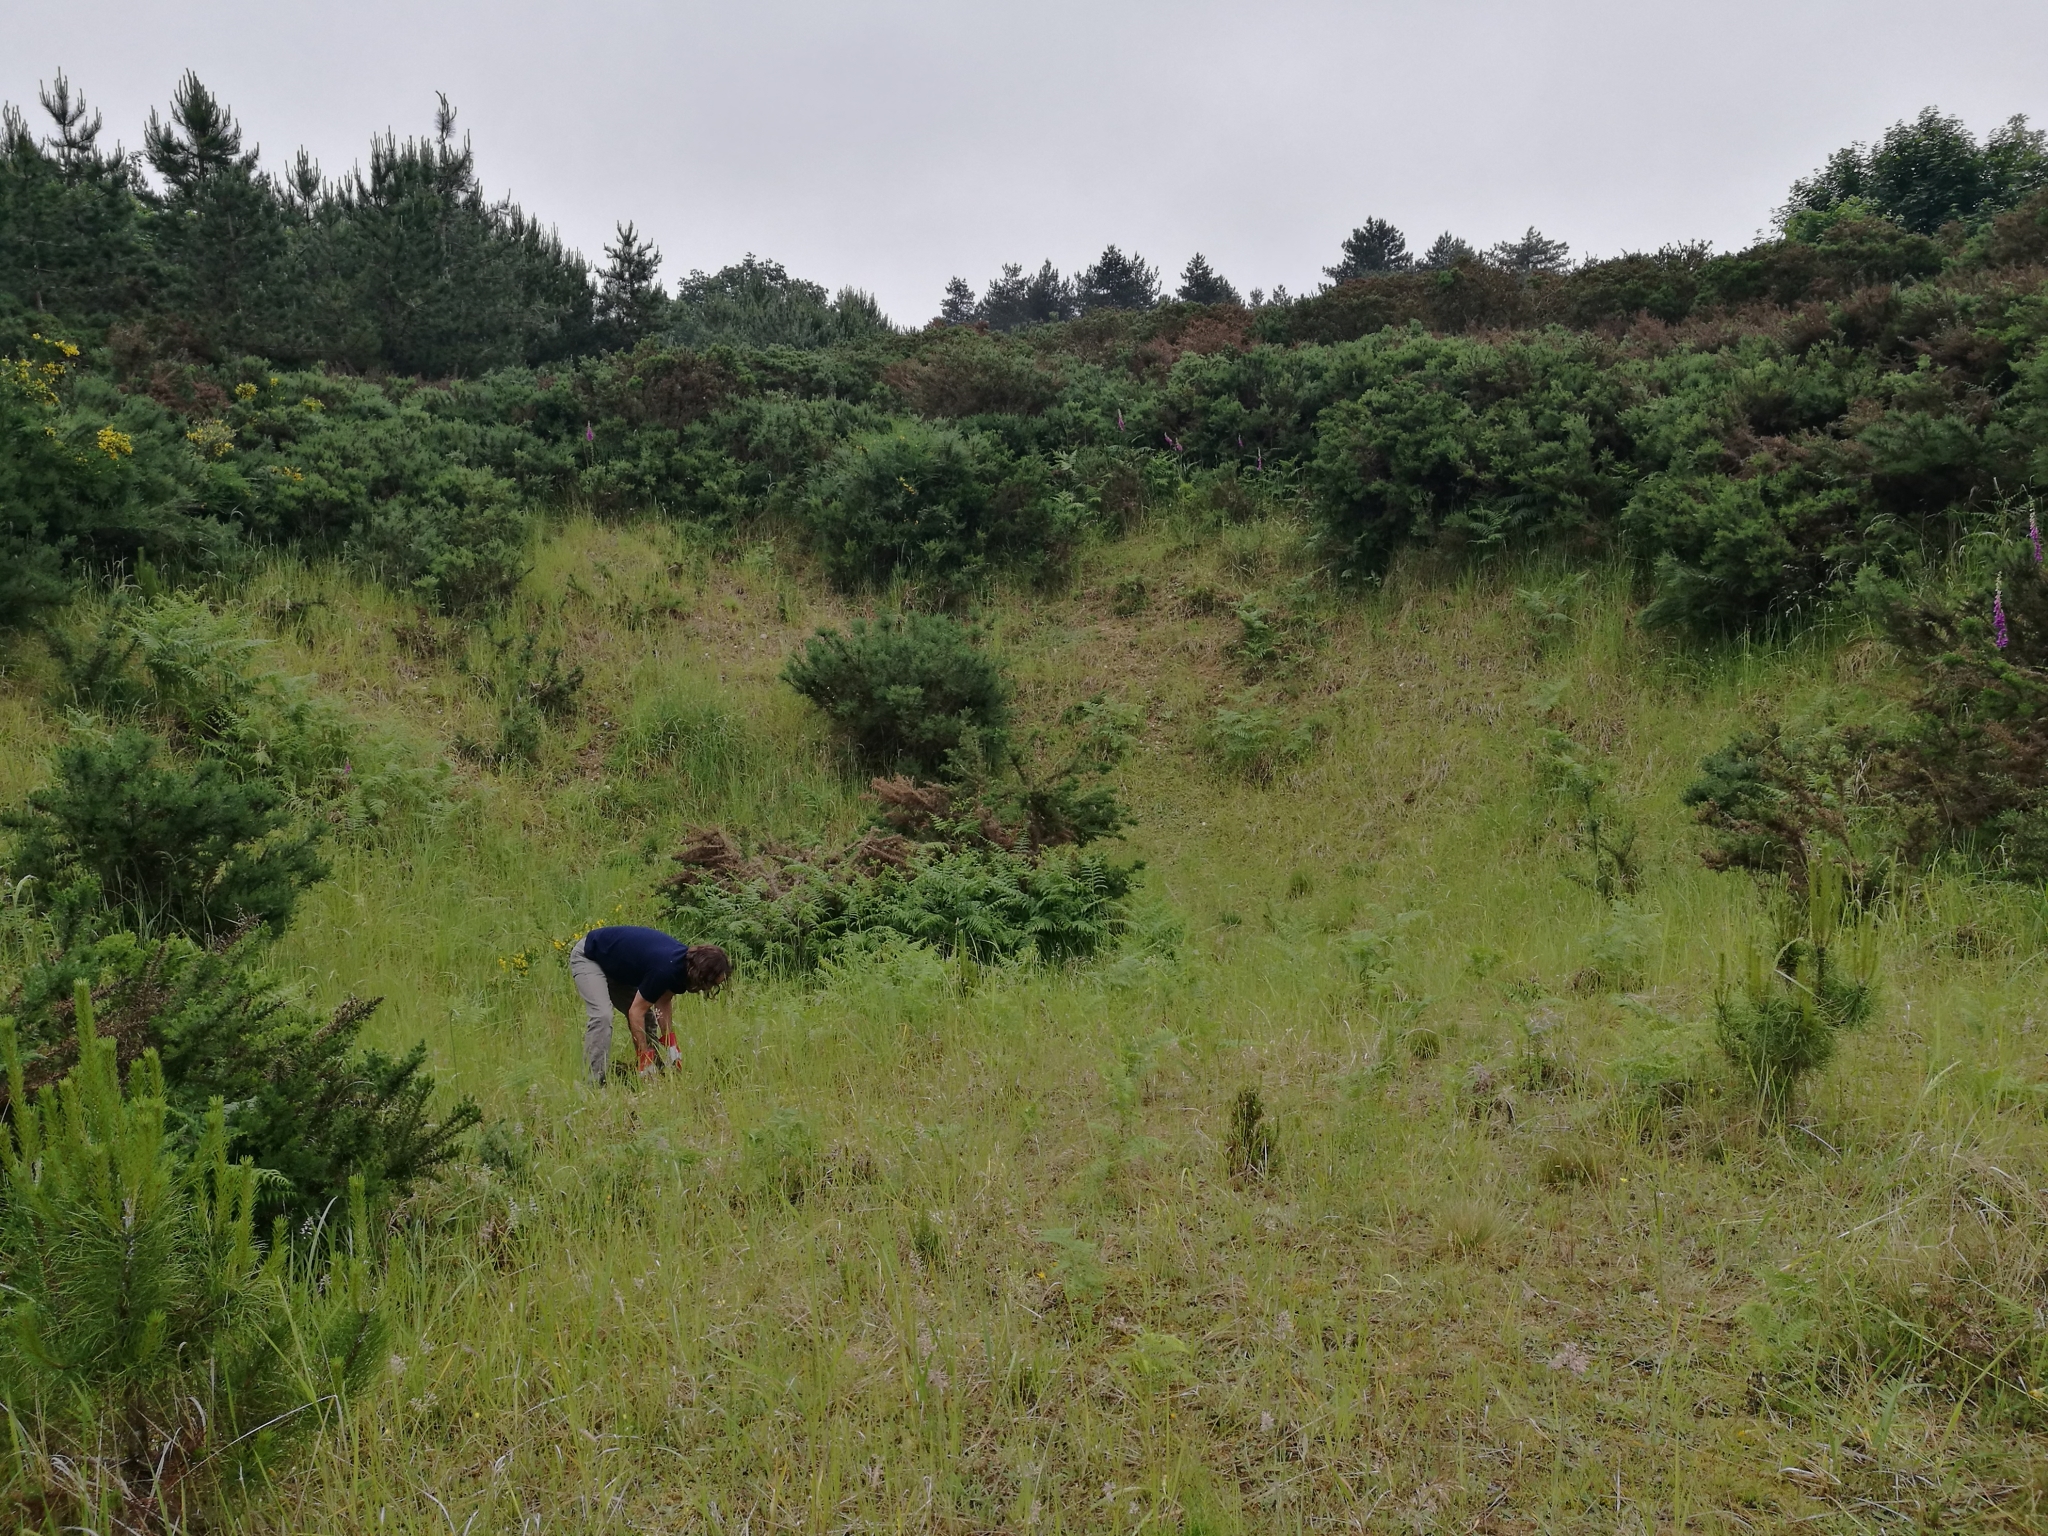 A photo from the FoTF Conservation Event - June 2021 - Brash Clearance at Mildenhall Mugwort Pit : A volunteer works in Mildenhall Mugwort Pit